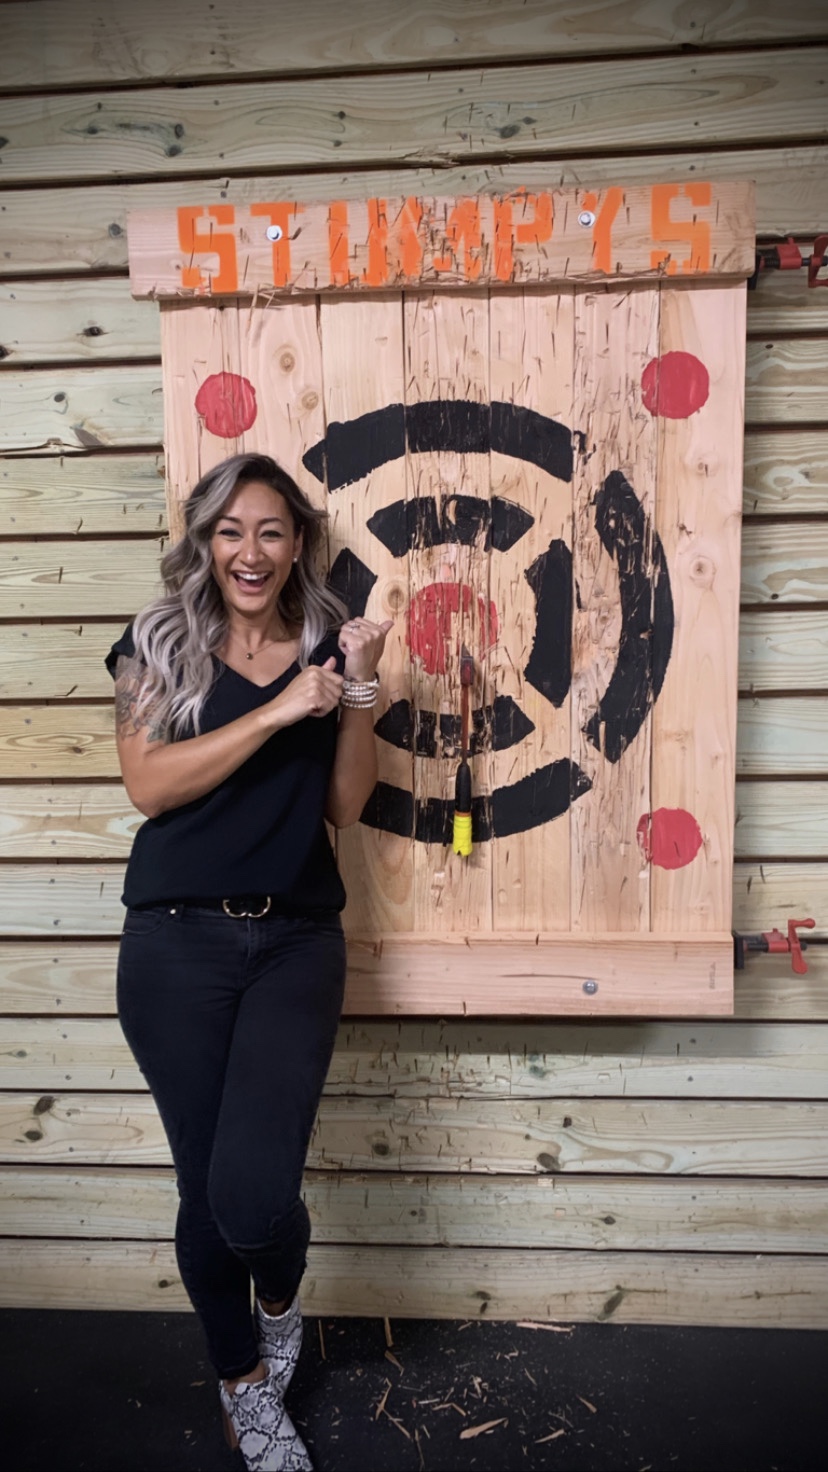 A woman poses in front of a target